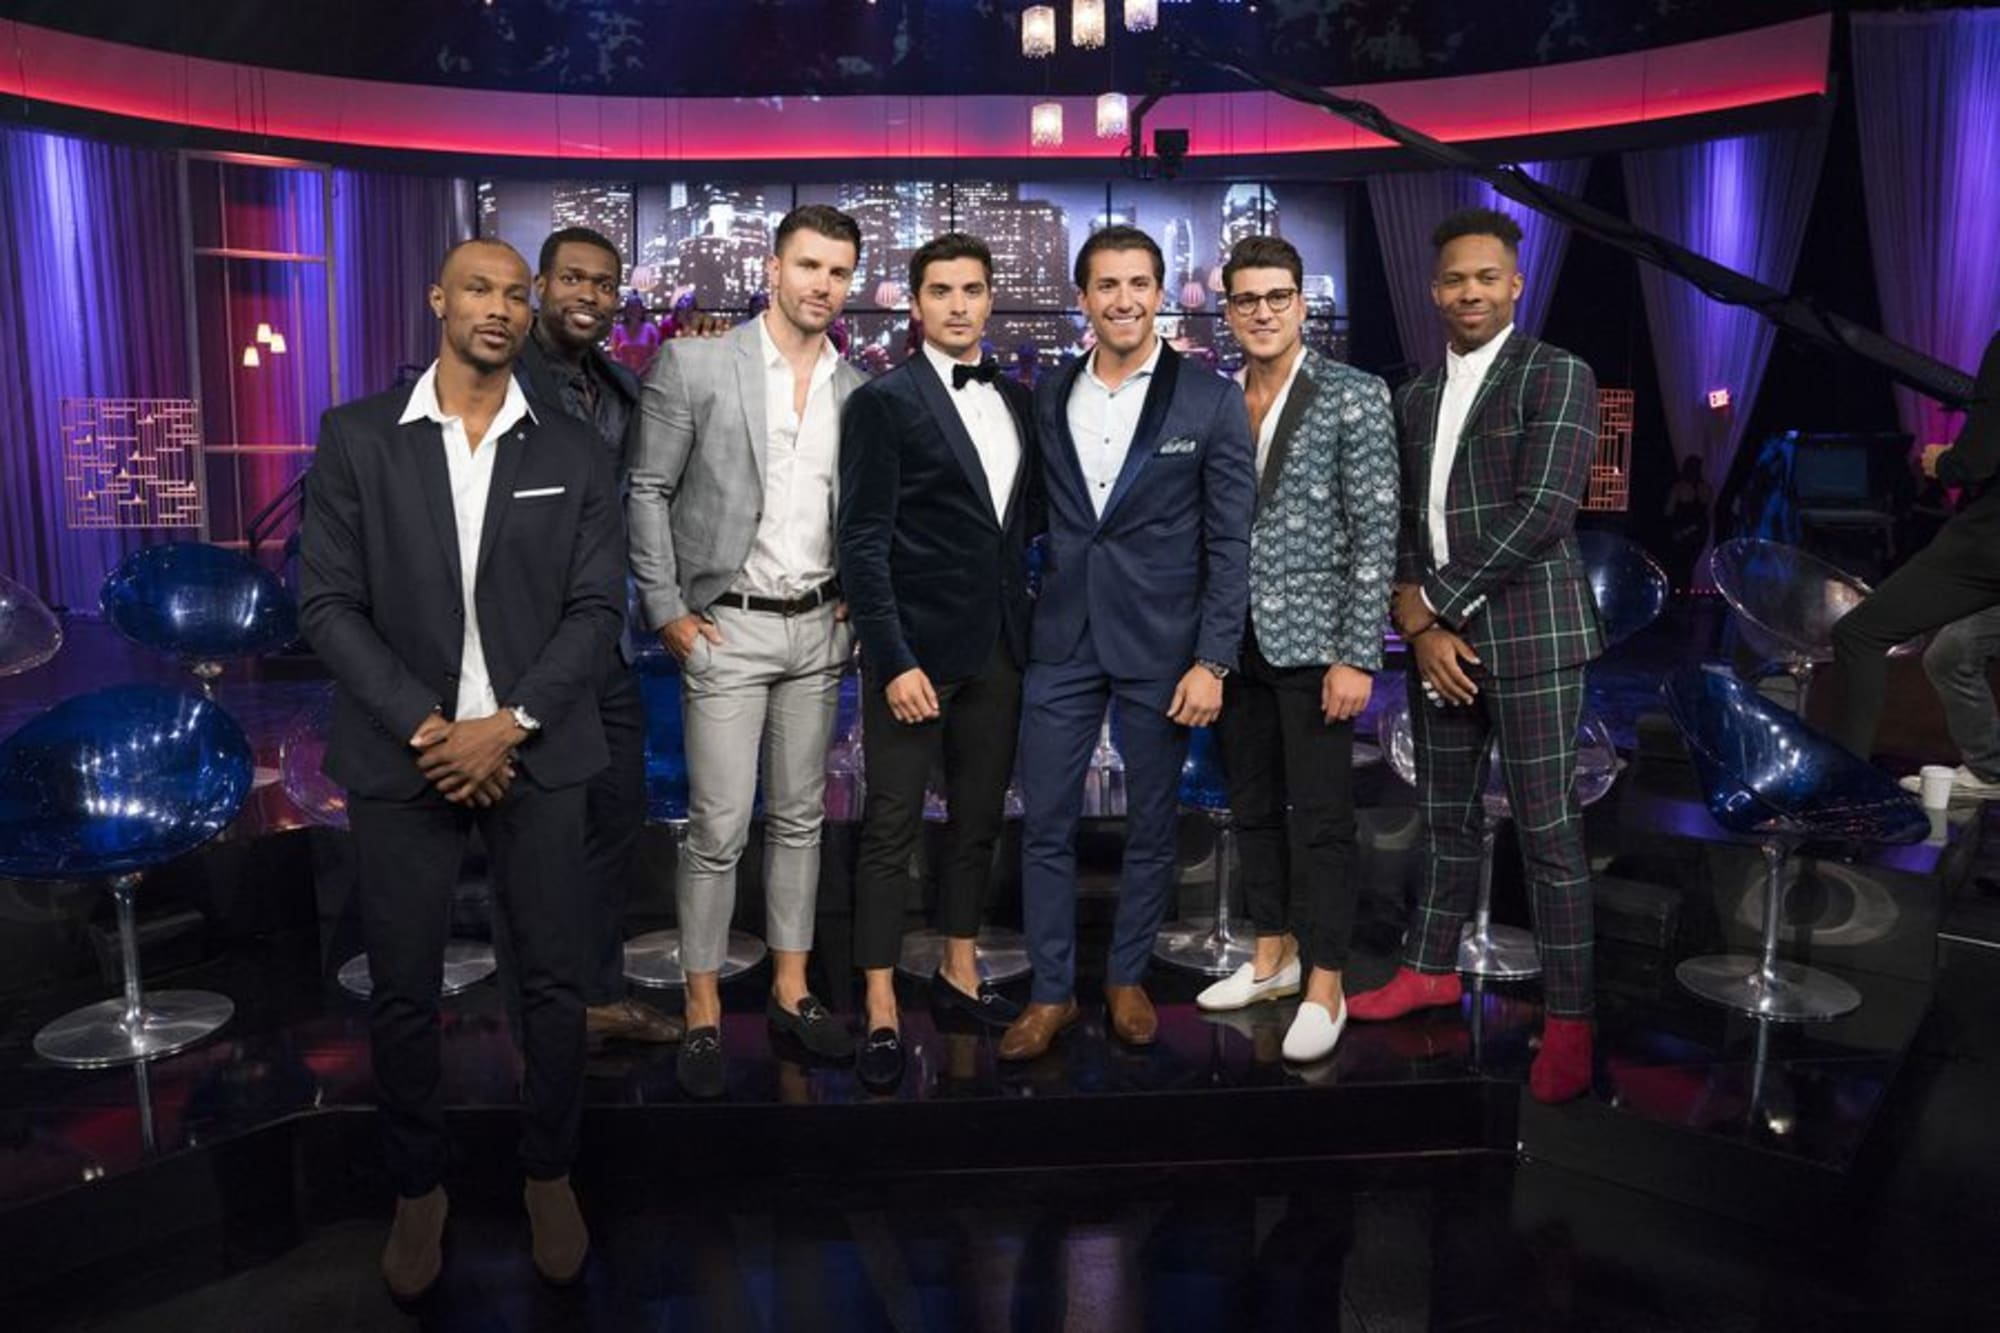 Watch Bachelorette Men Tell All live streaming online Monday night